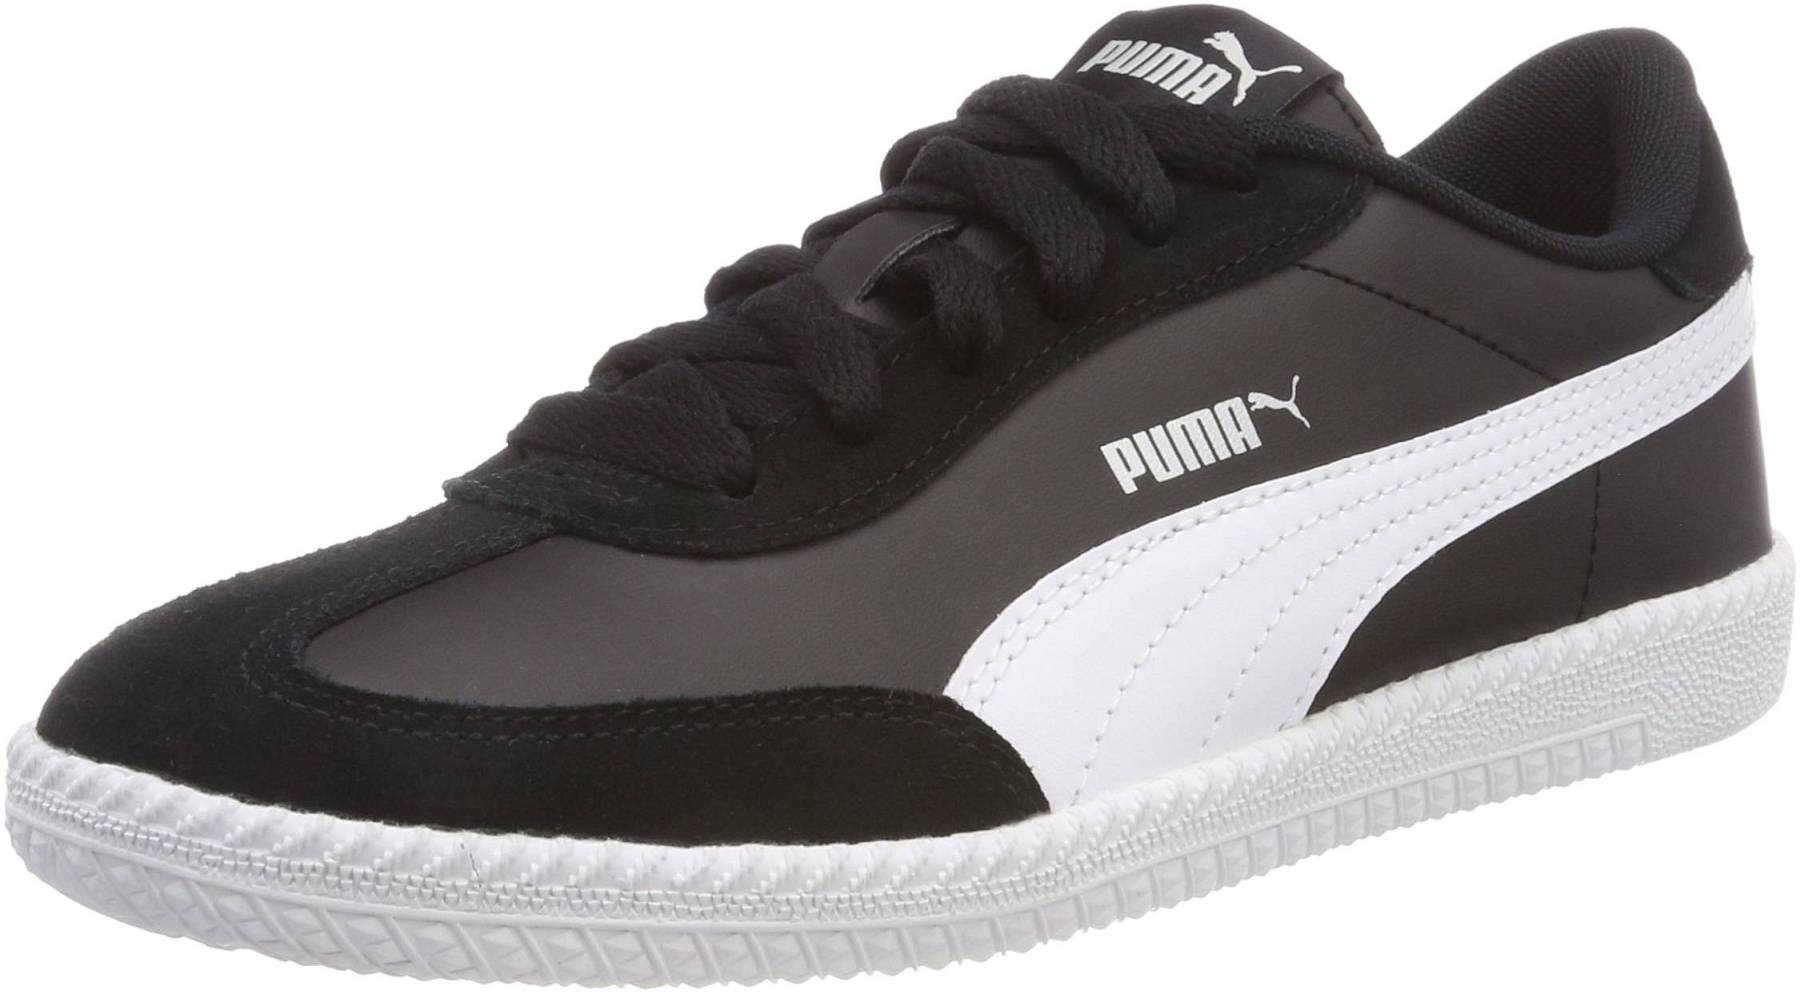 Puma Astro Cup SL – Shoes Reviews & Reasons To Buy